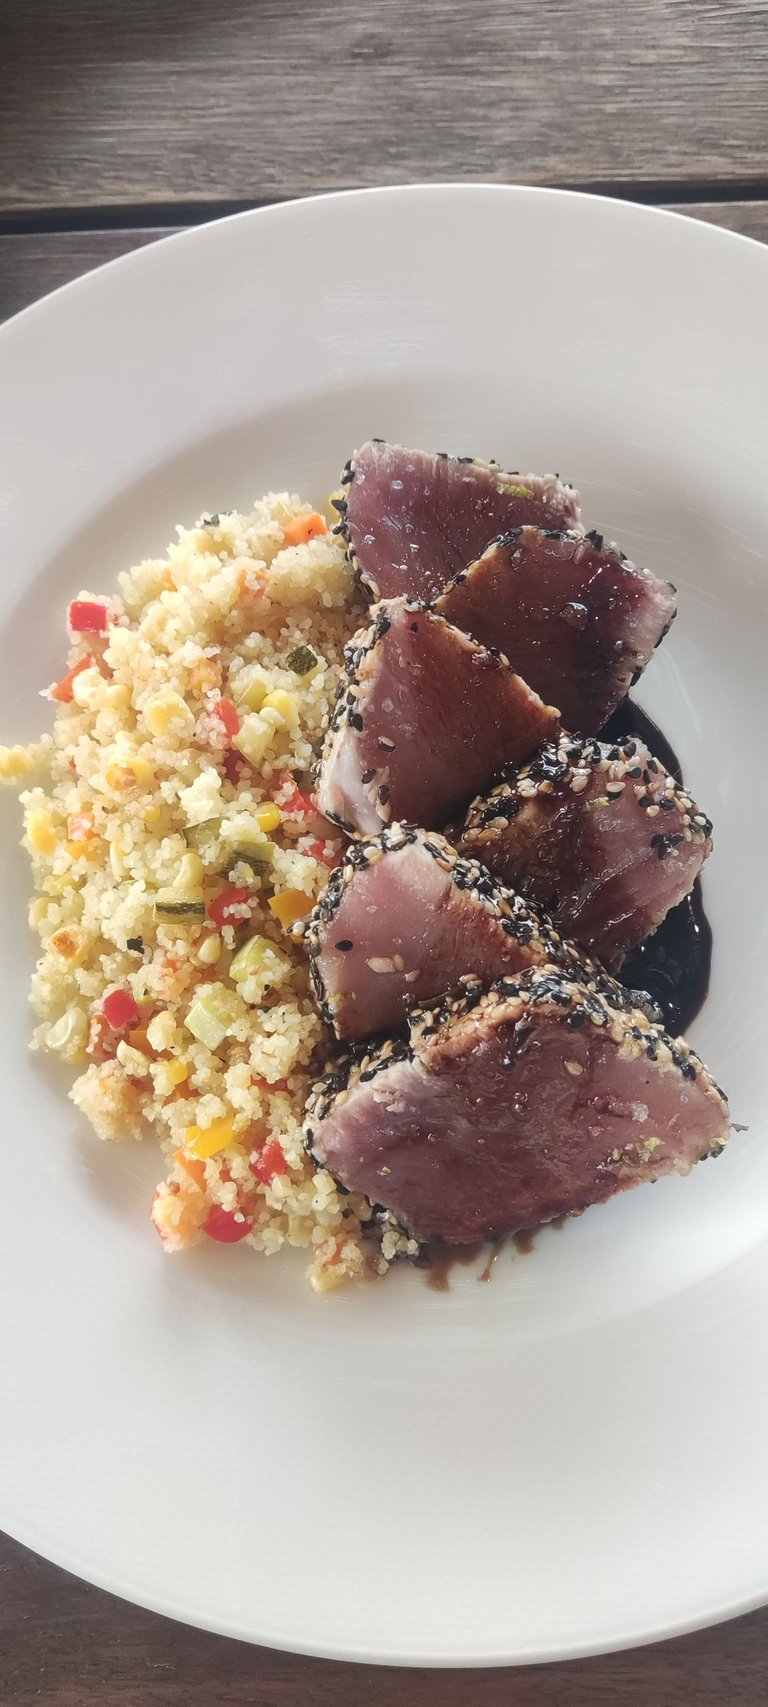 Semi-raw seared tuna in a sesame crust, served with Moroccan couscous with vegetables in olive oil and tarê sauce.